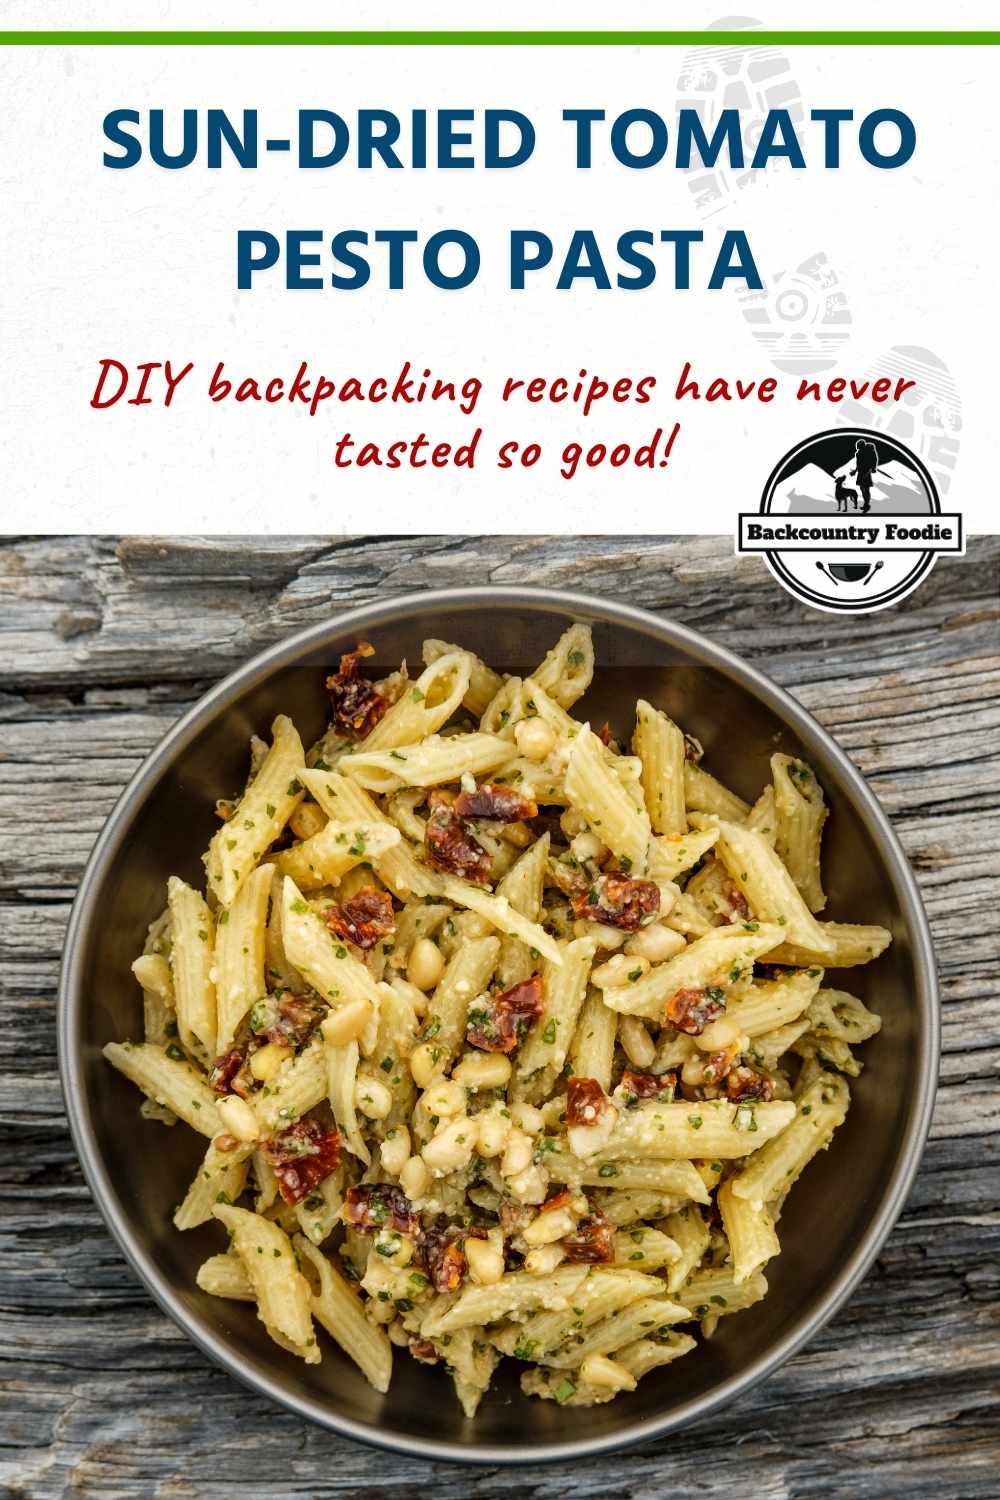 This grocery-friendly cold soak backpacking pesto recipe packs a flavorful punch with no fresh basil required. You may find yourself eating it at home, too! #backpackingmealideas #backpackingfoodrecipes #coldsoakbackpackingrecipes #dehydratedbackpackingmeals #backcountryfoodie